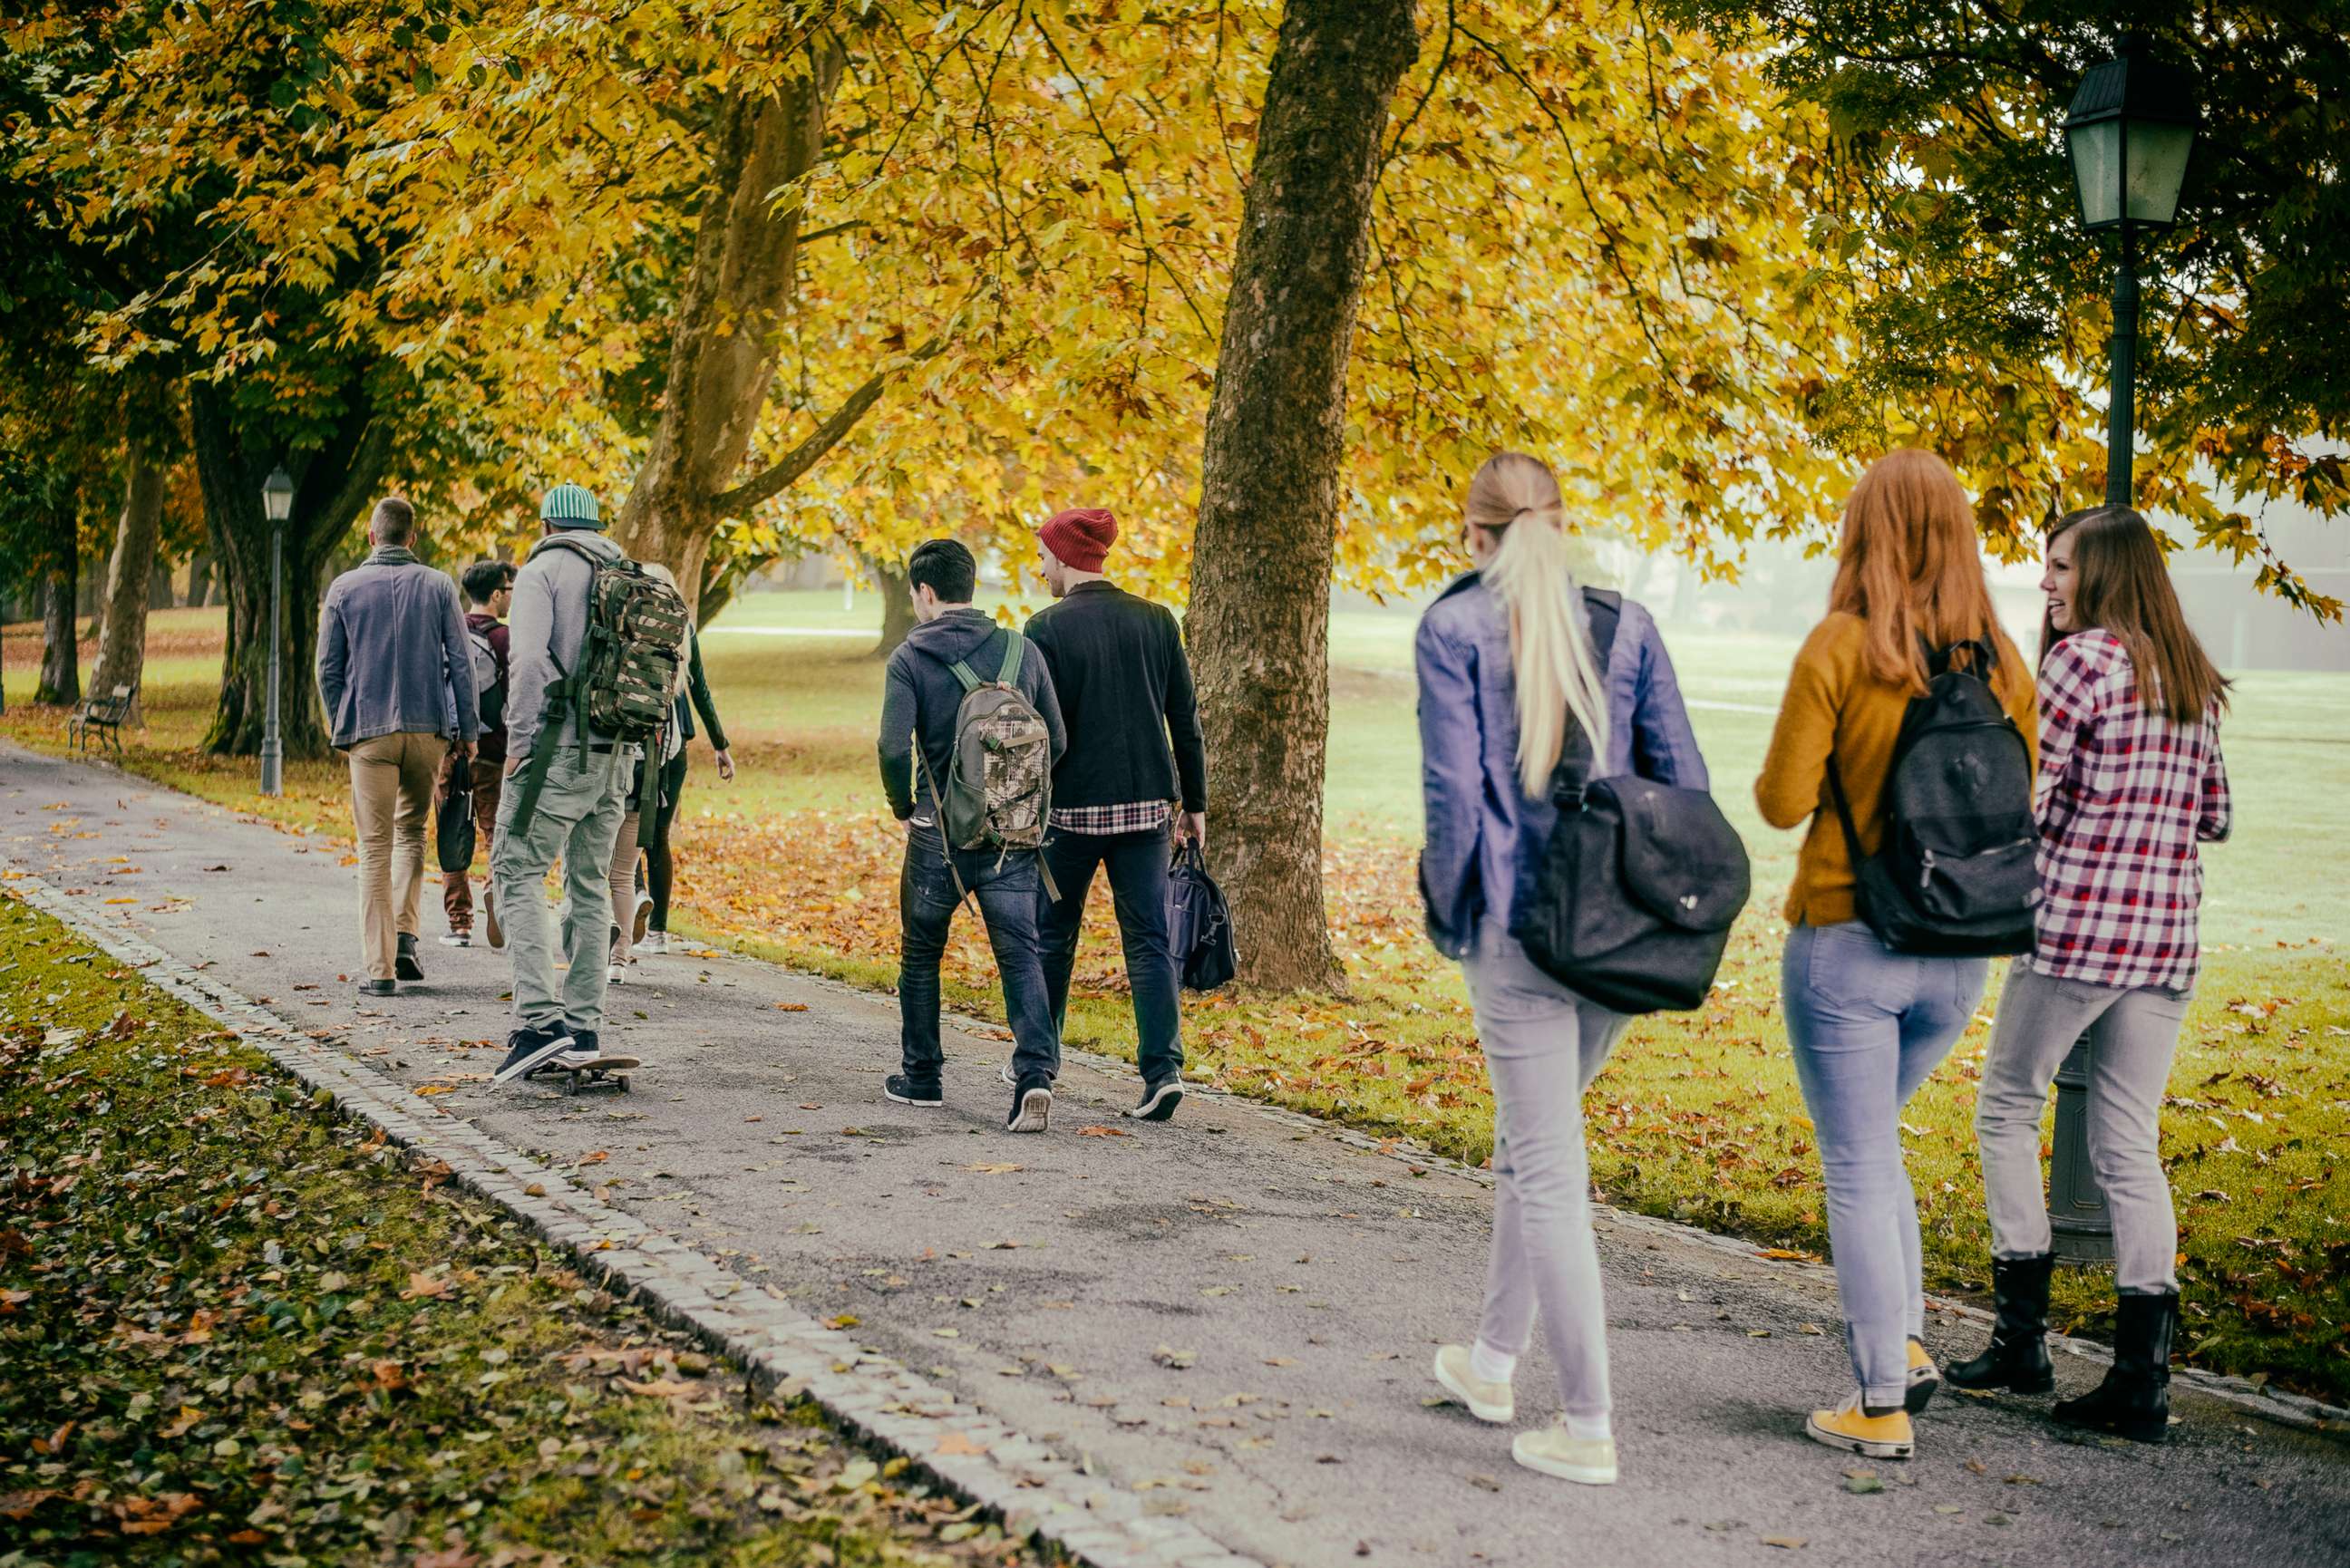 PHOTO: In this undated file photo, students walk through a park in autumn.